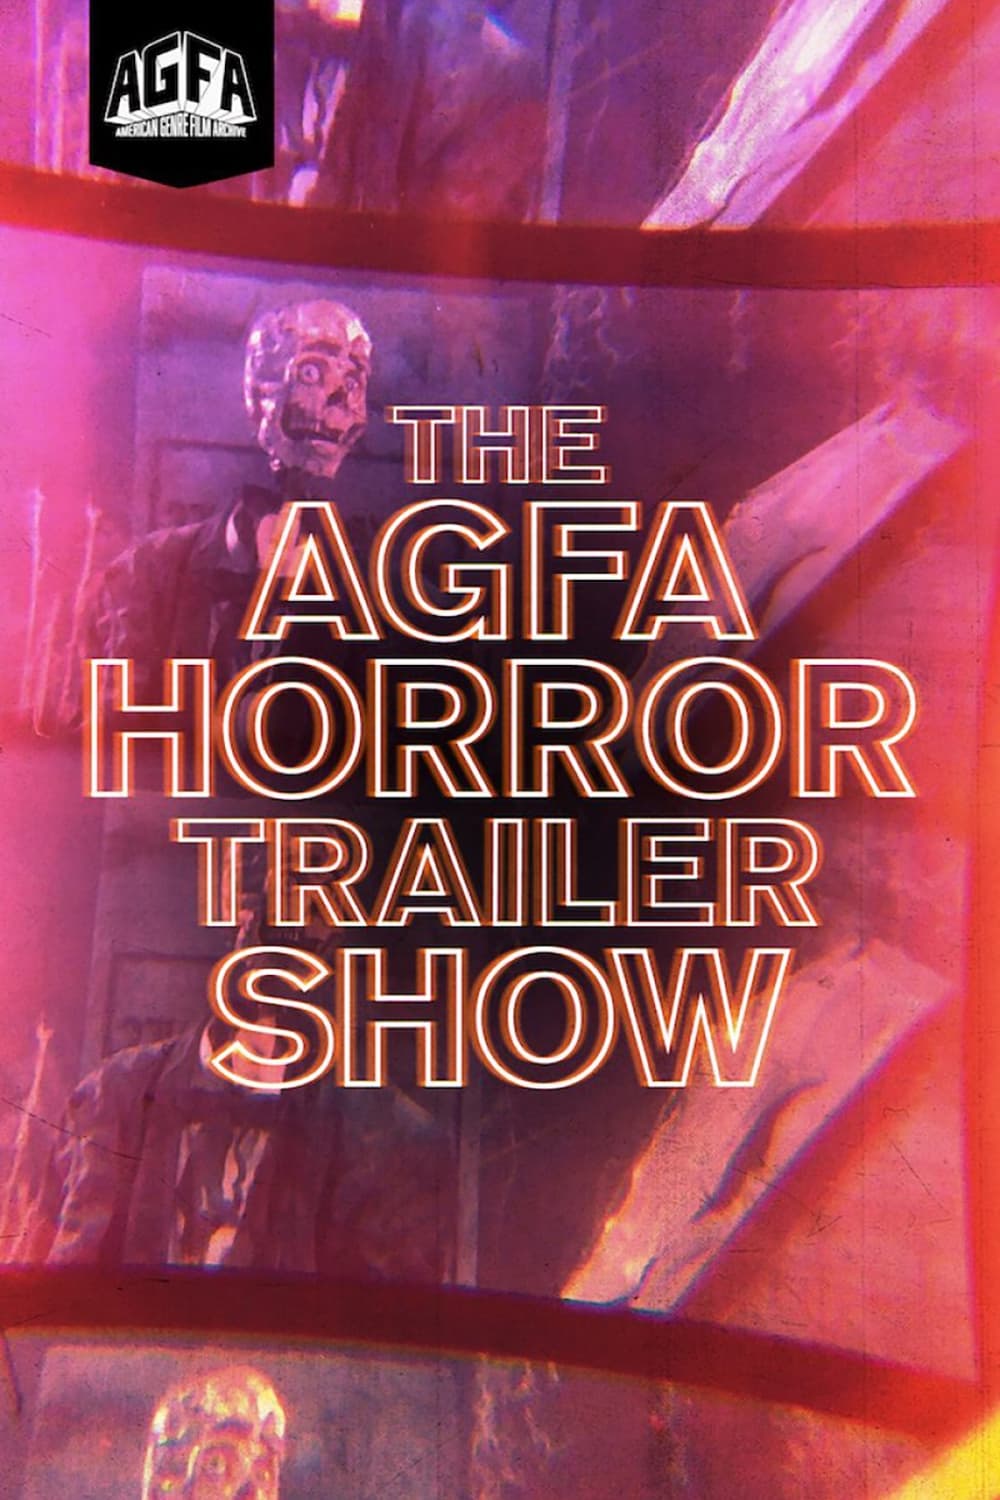 The Cult of AGFA Trailer Show